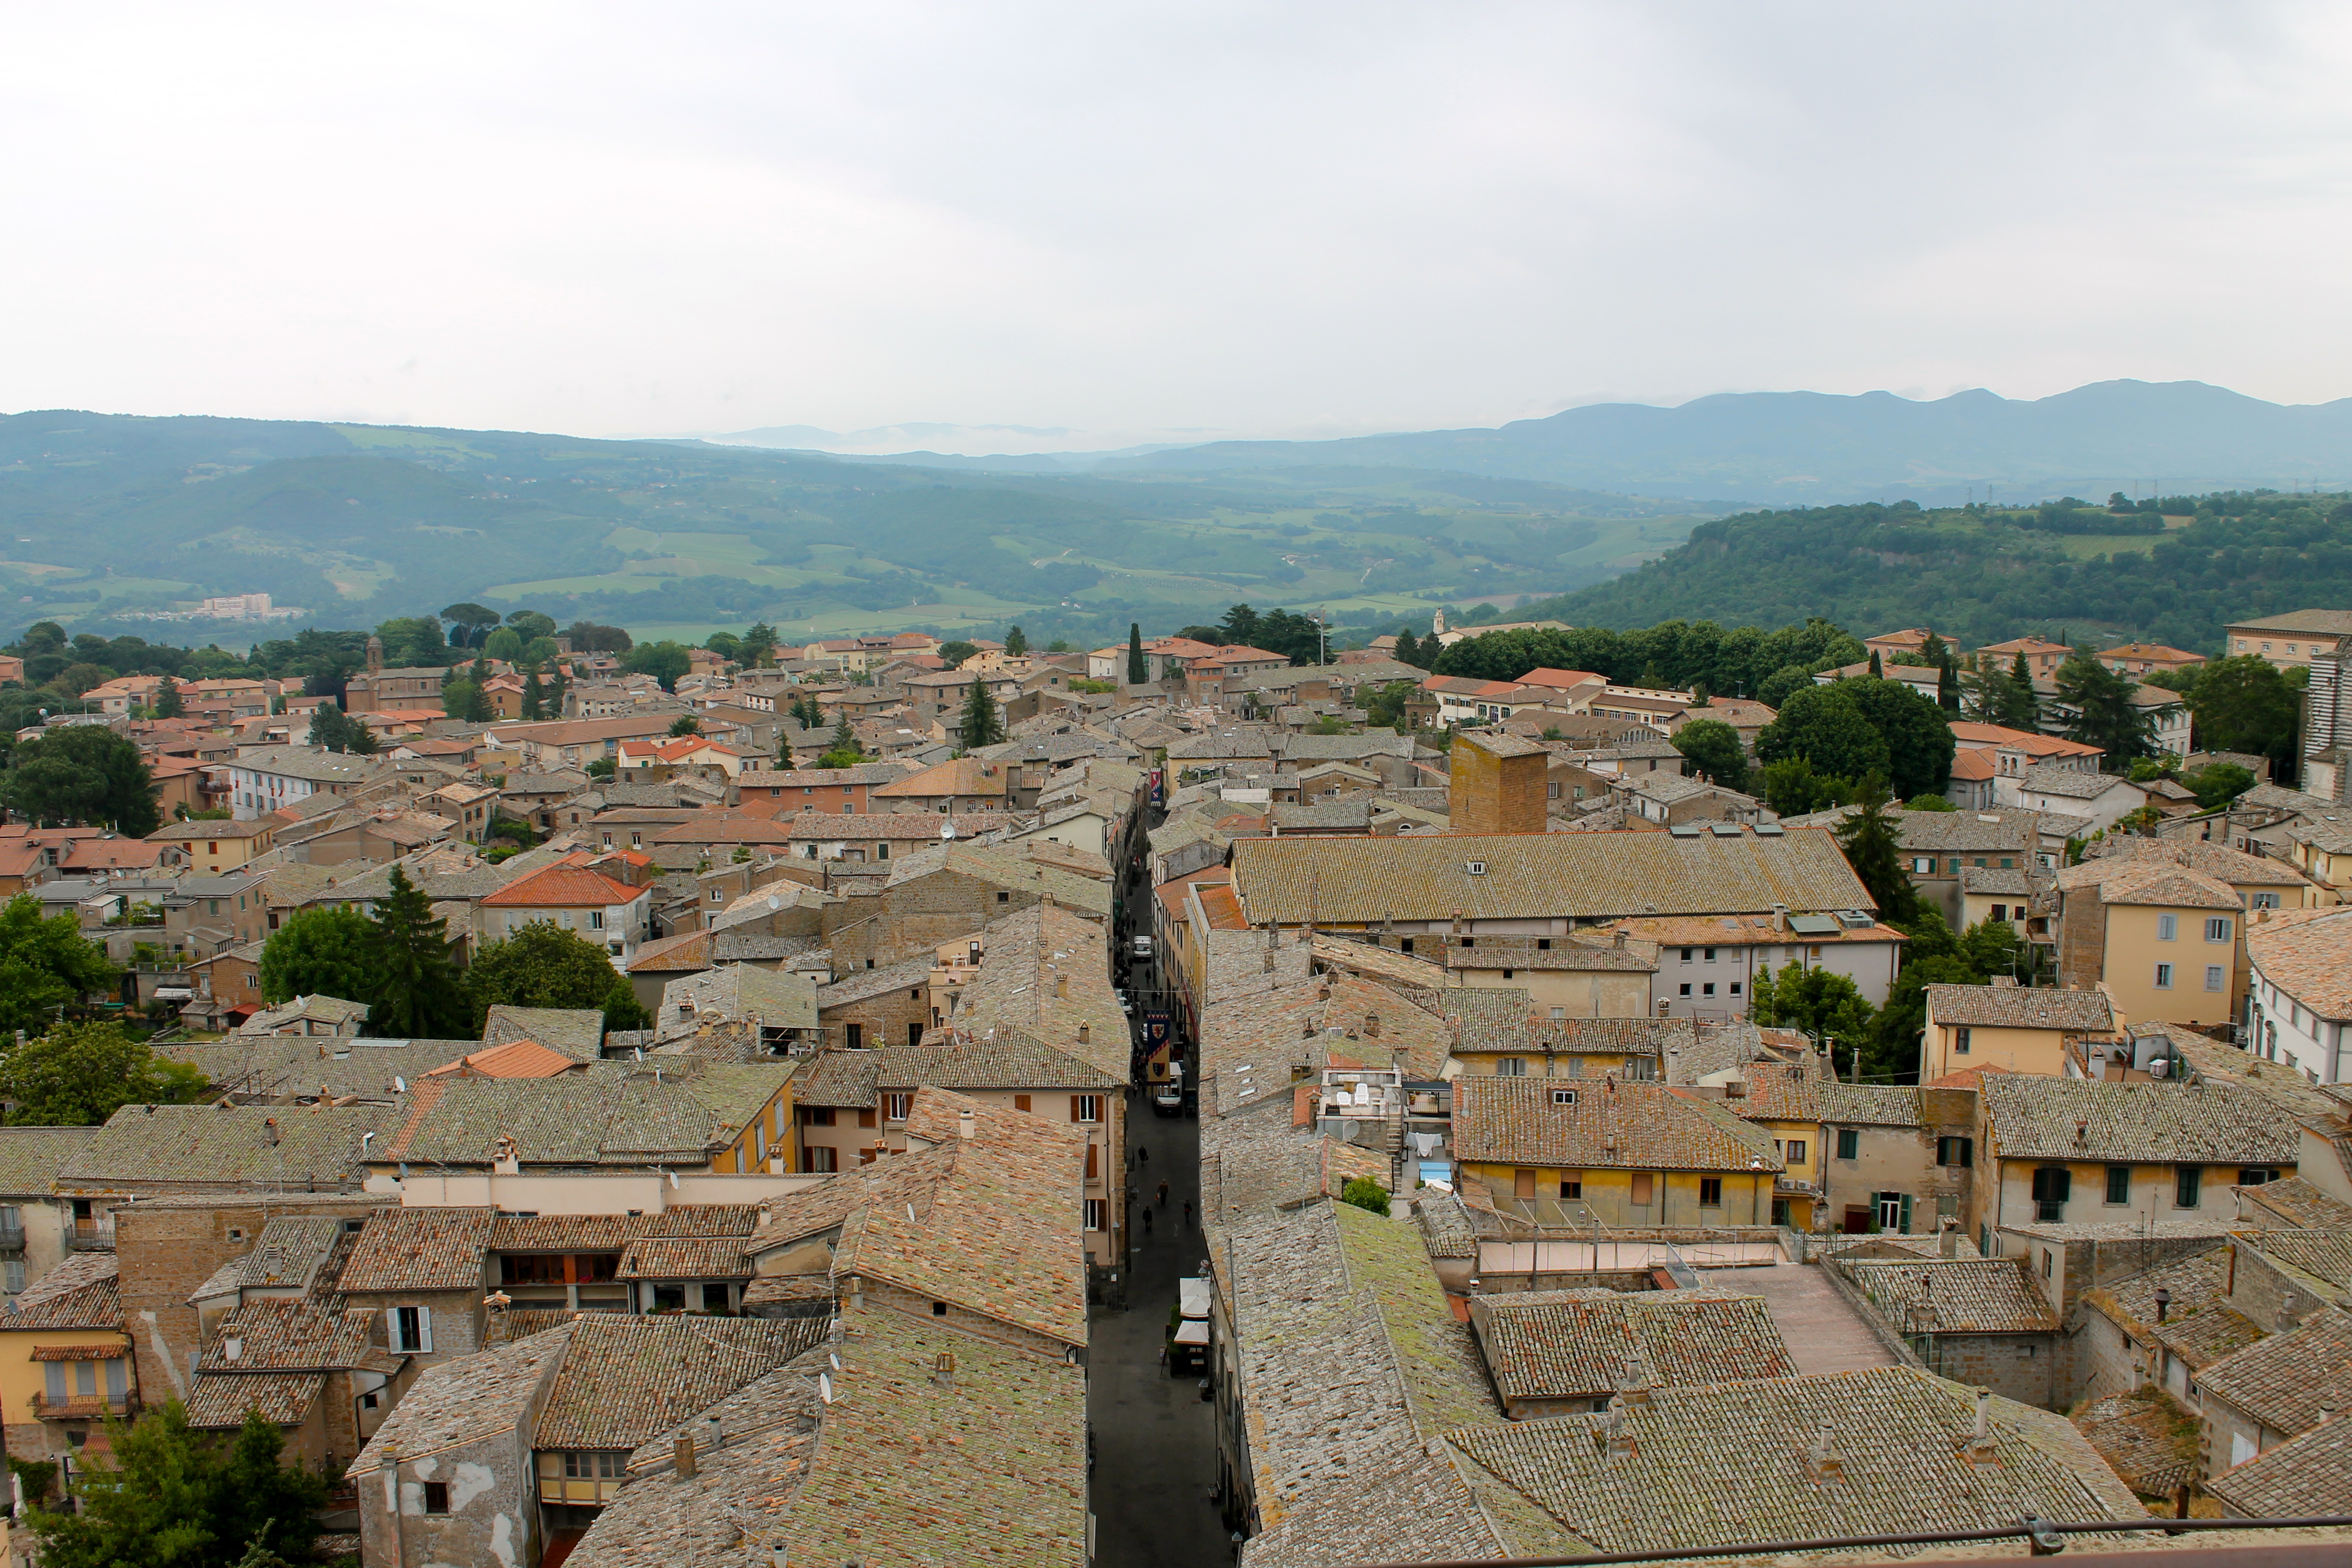 A picturesque view of Orvieto